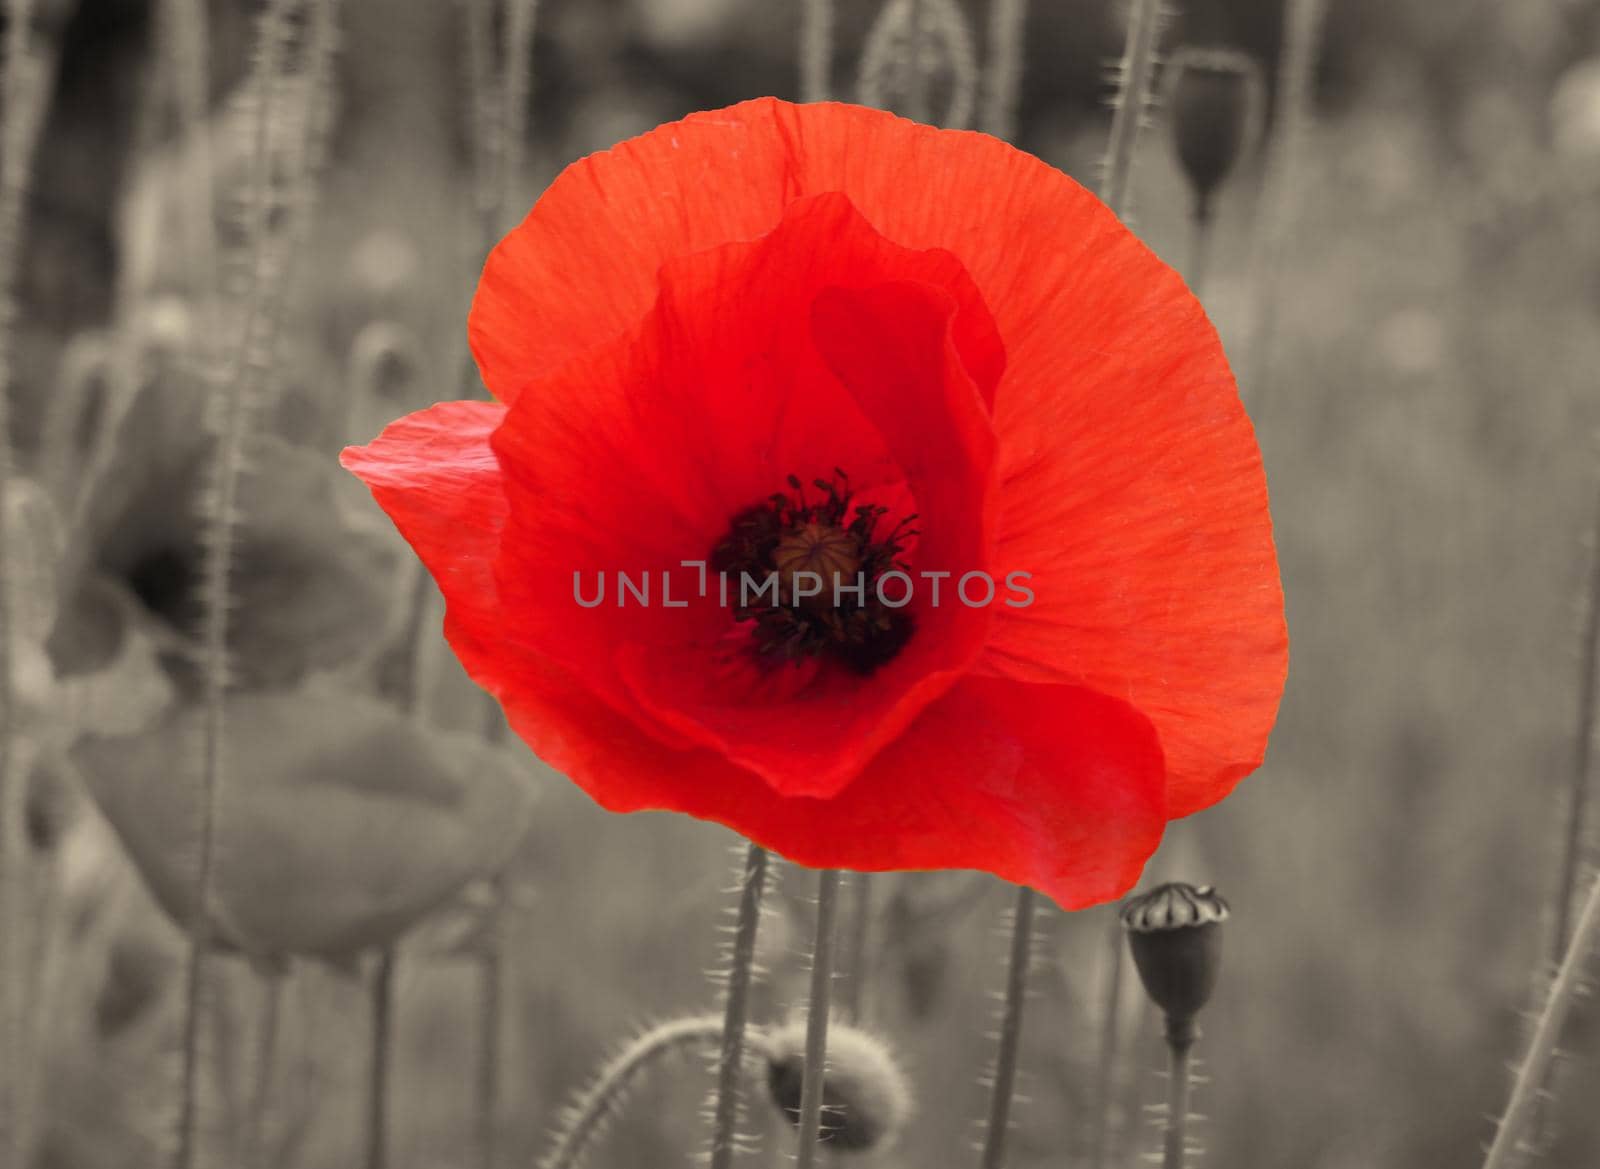 a close up of a bright red common poppy flower on a vintage sepia background - war remembrance concept by philopenshaw